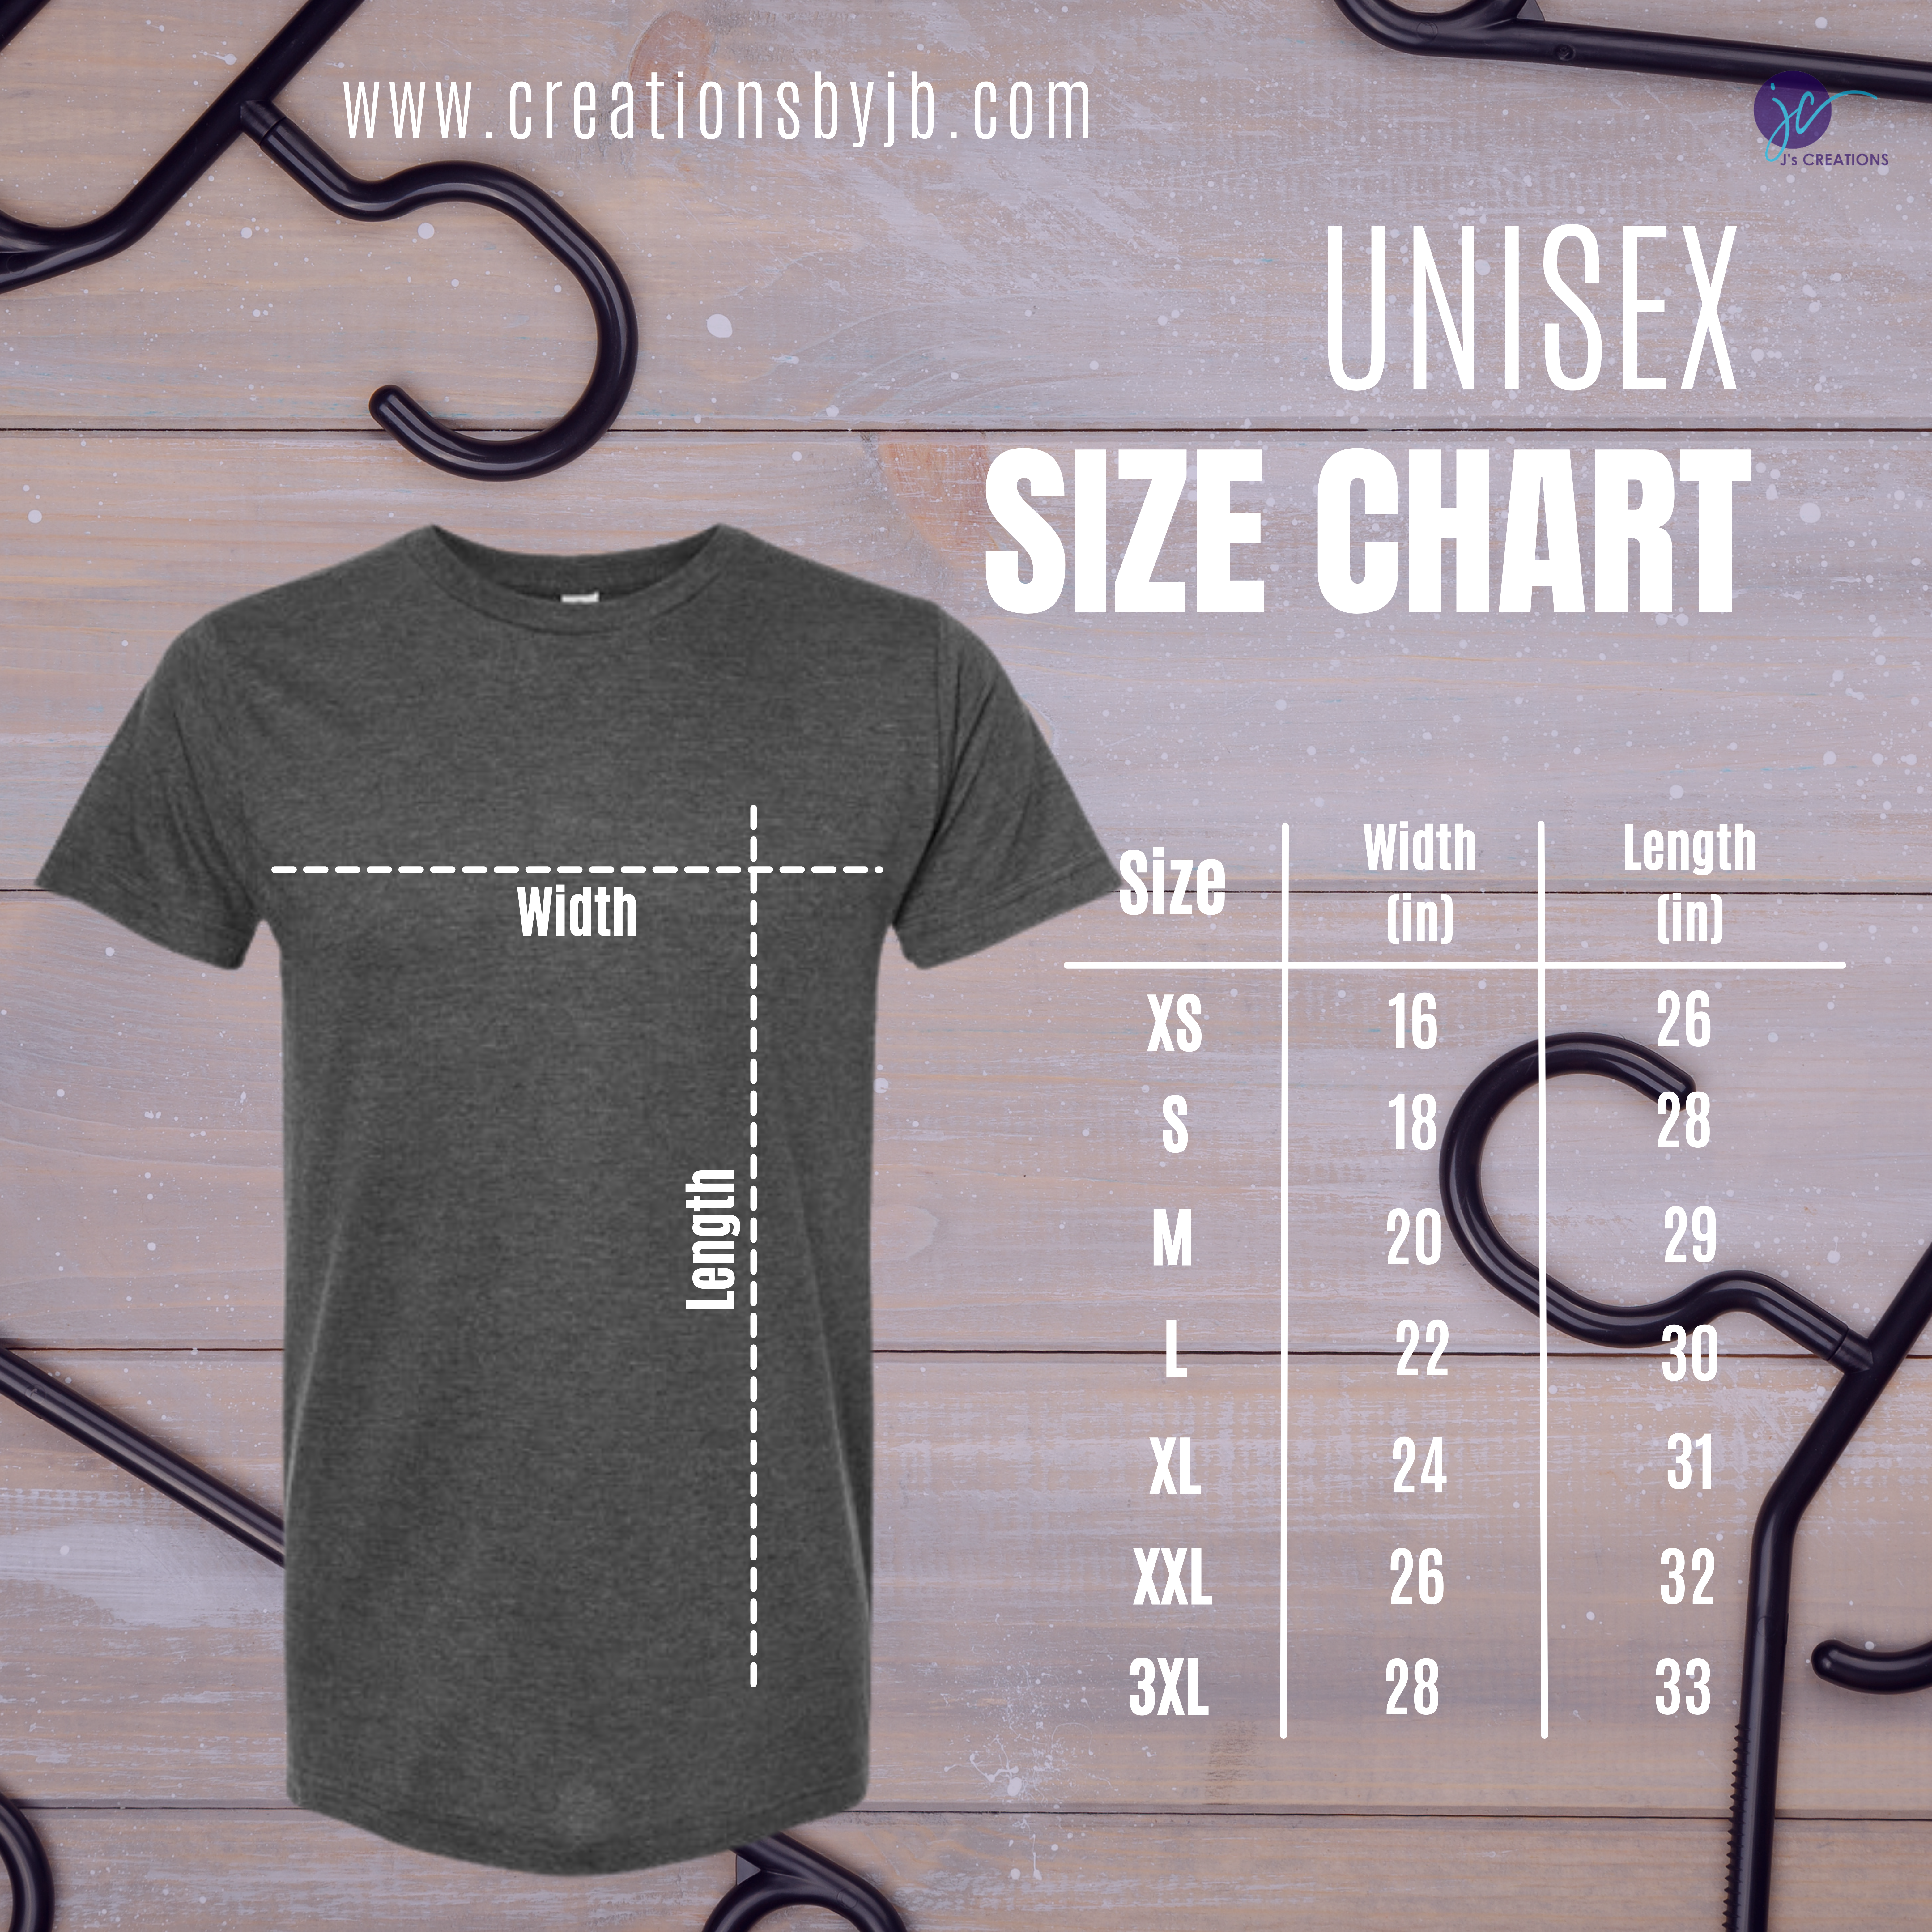 A t-shirt with the size of it and its length.